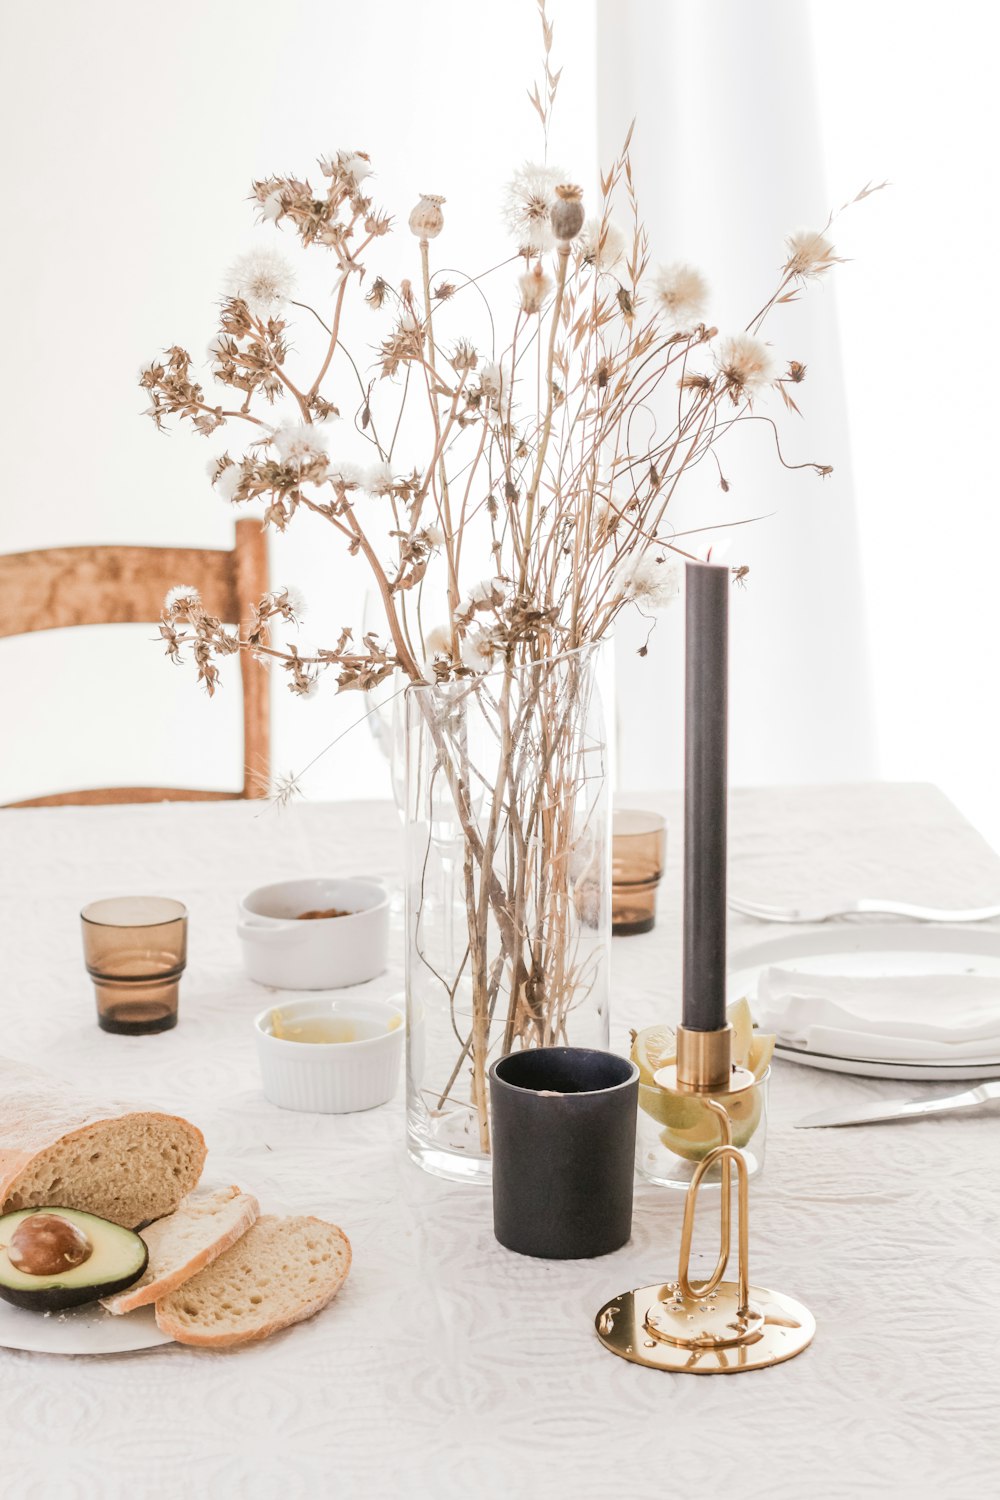 bread and flower placed on table